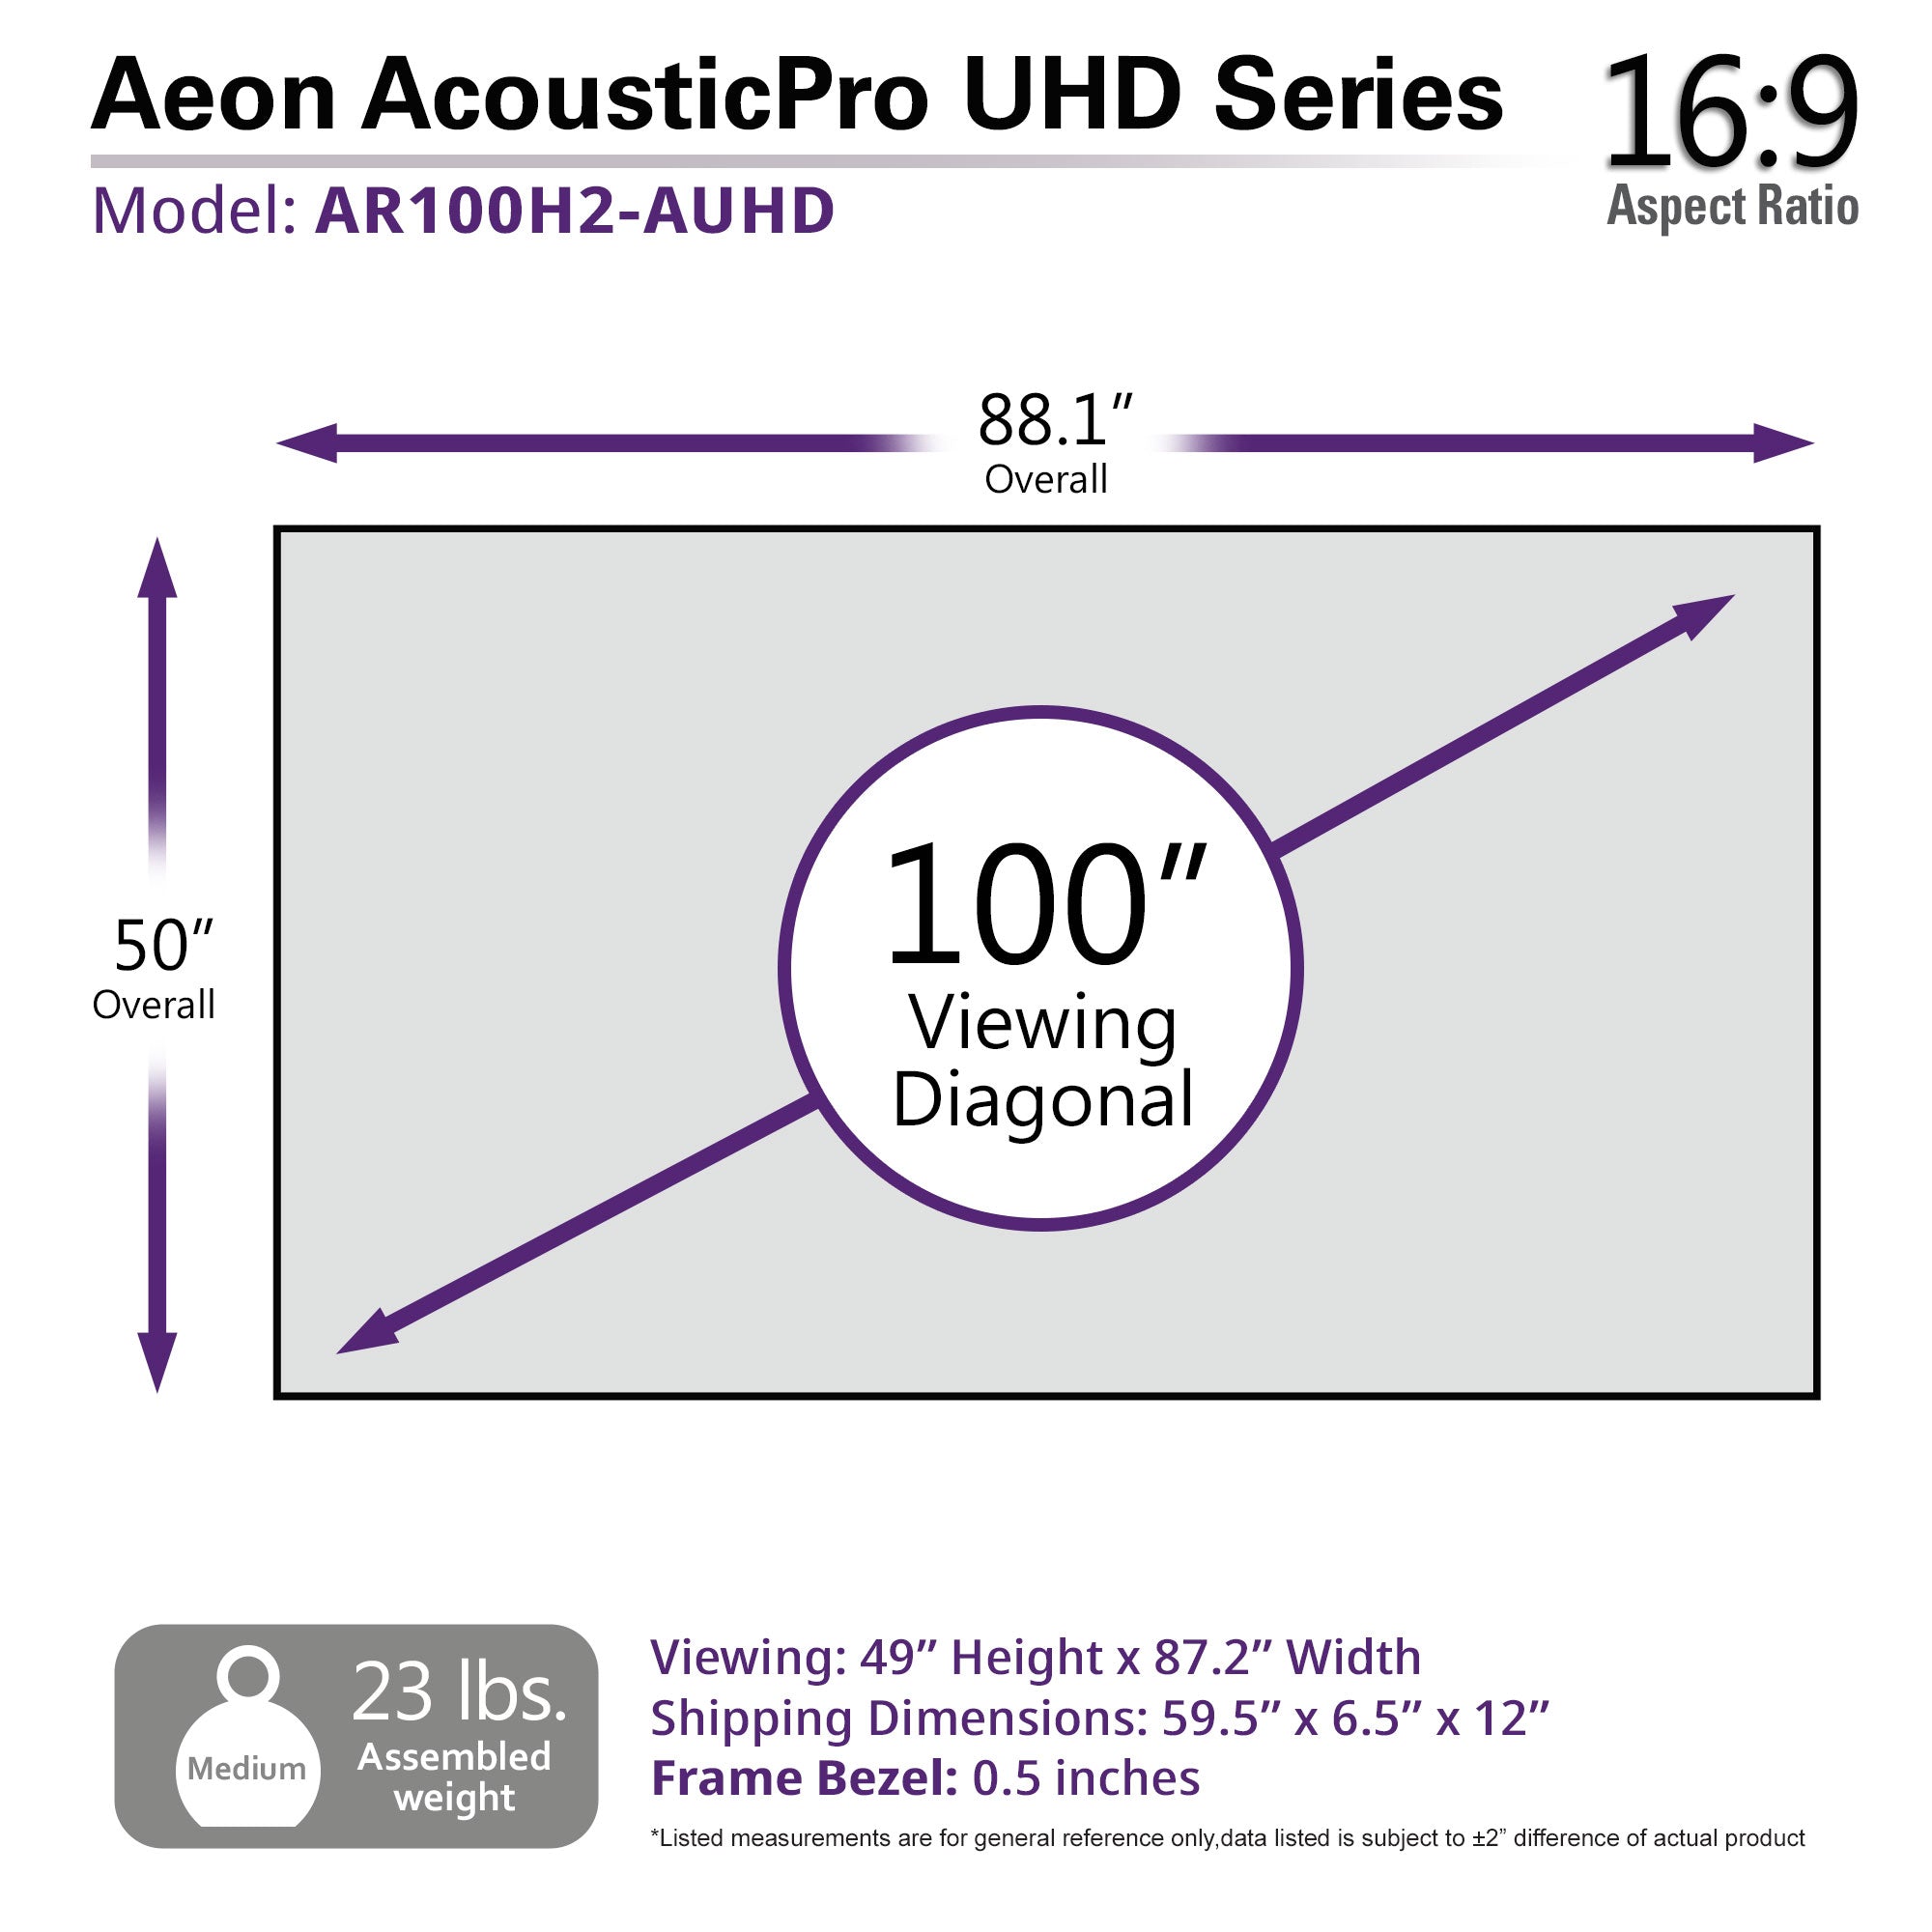 Elite Screens Aeon AcousticPro UHD 100" Diag. 16:9, 4K Home Theater Fixed Frame EDGE FREE® Projection Sound Transparent Perforated Weave Projection Screen, AR100H2-AUHD